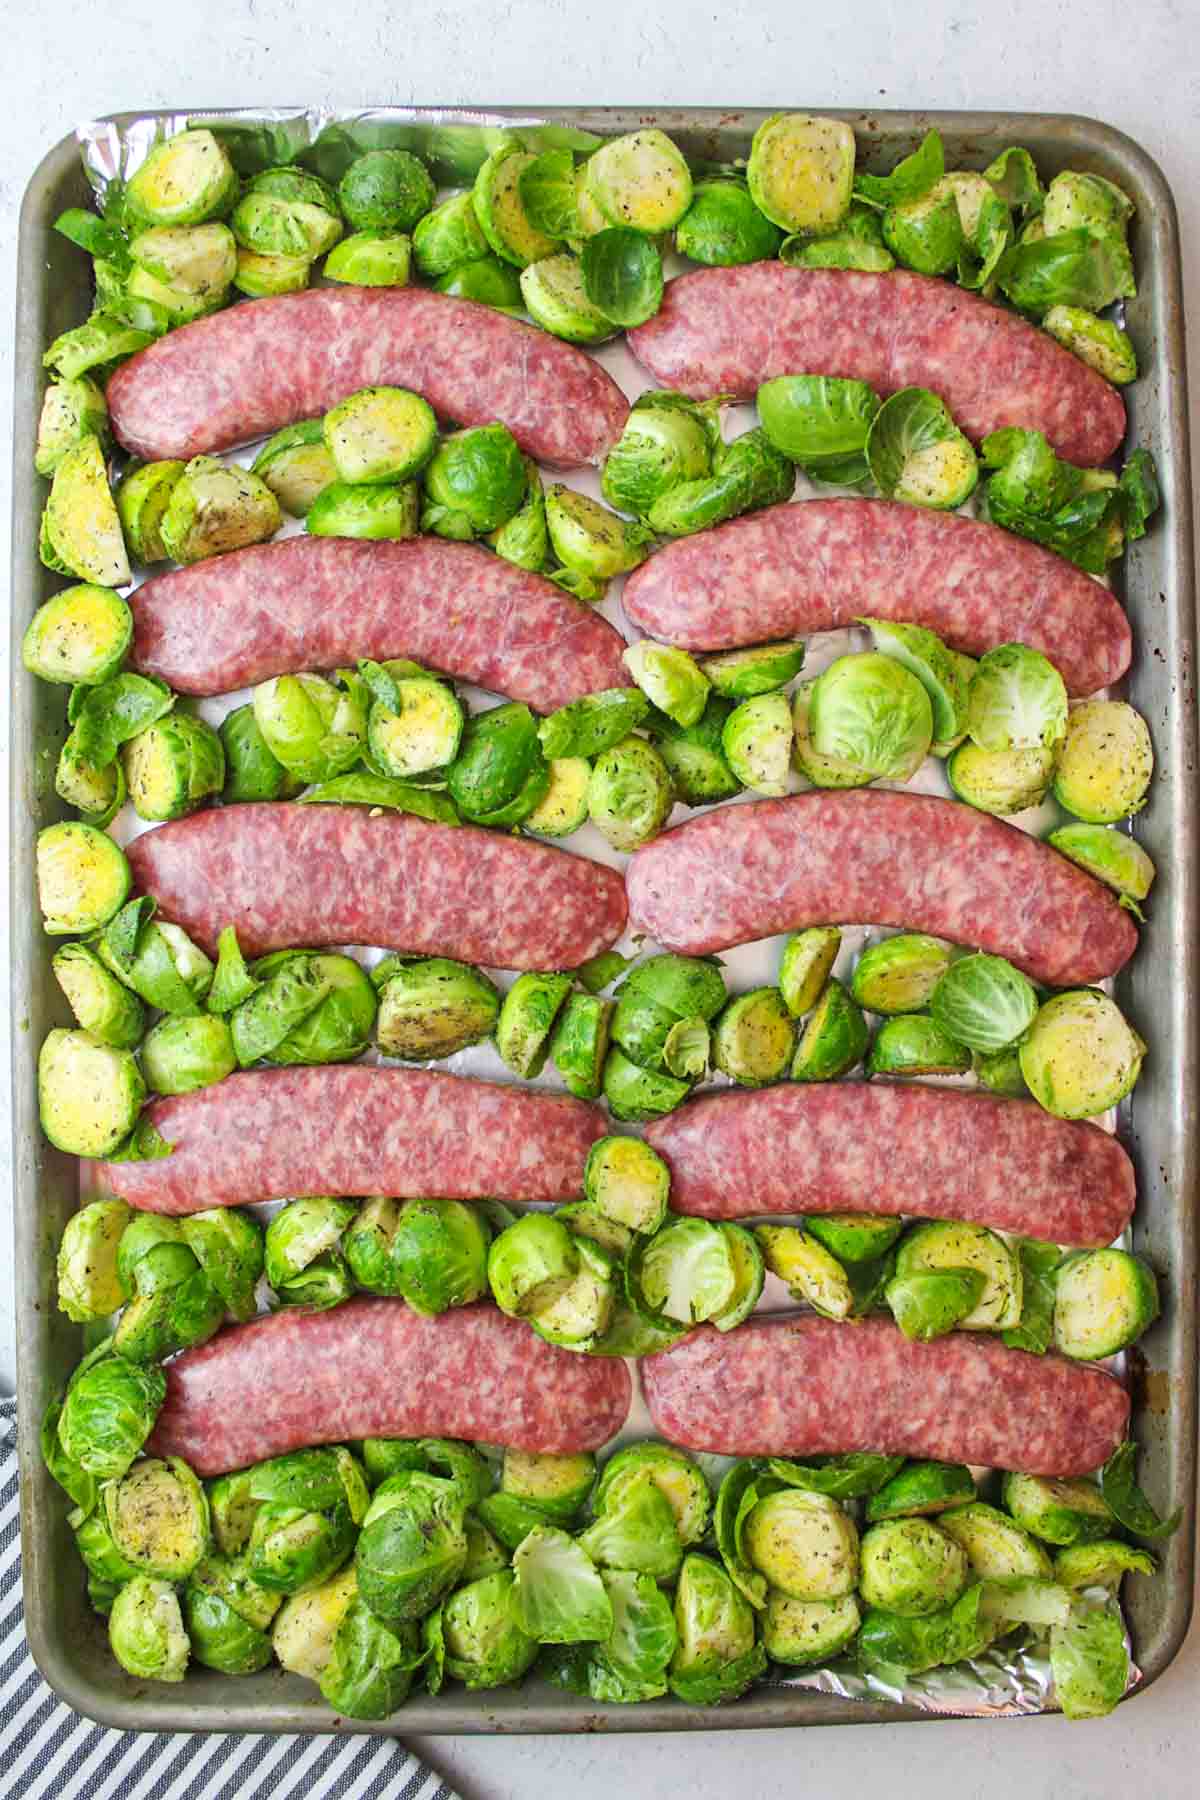 raw sausages on a baking sheet with halved brussel sprouts around them.